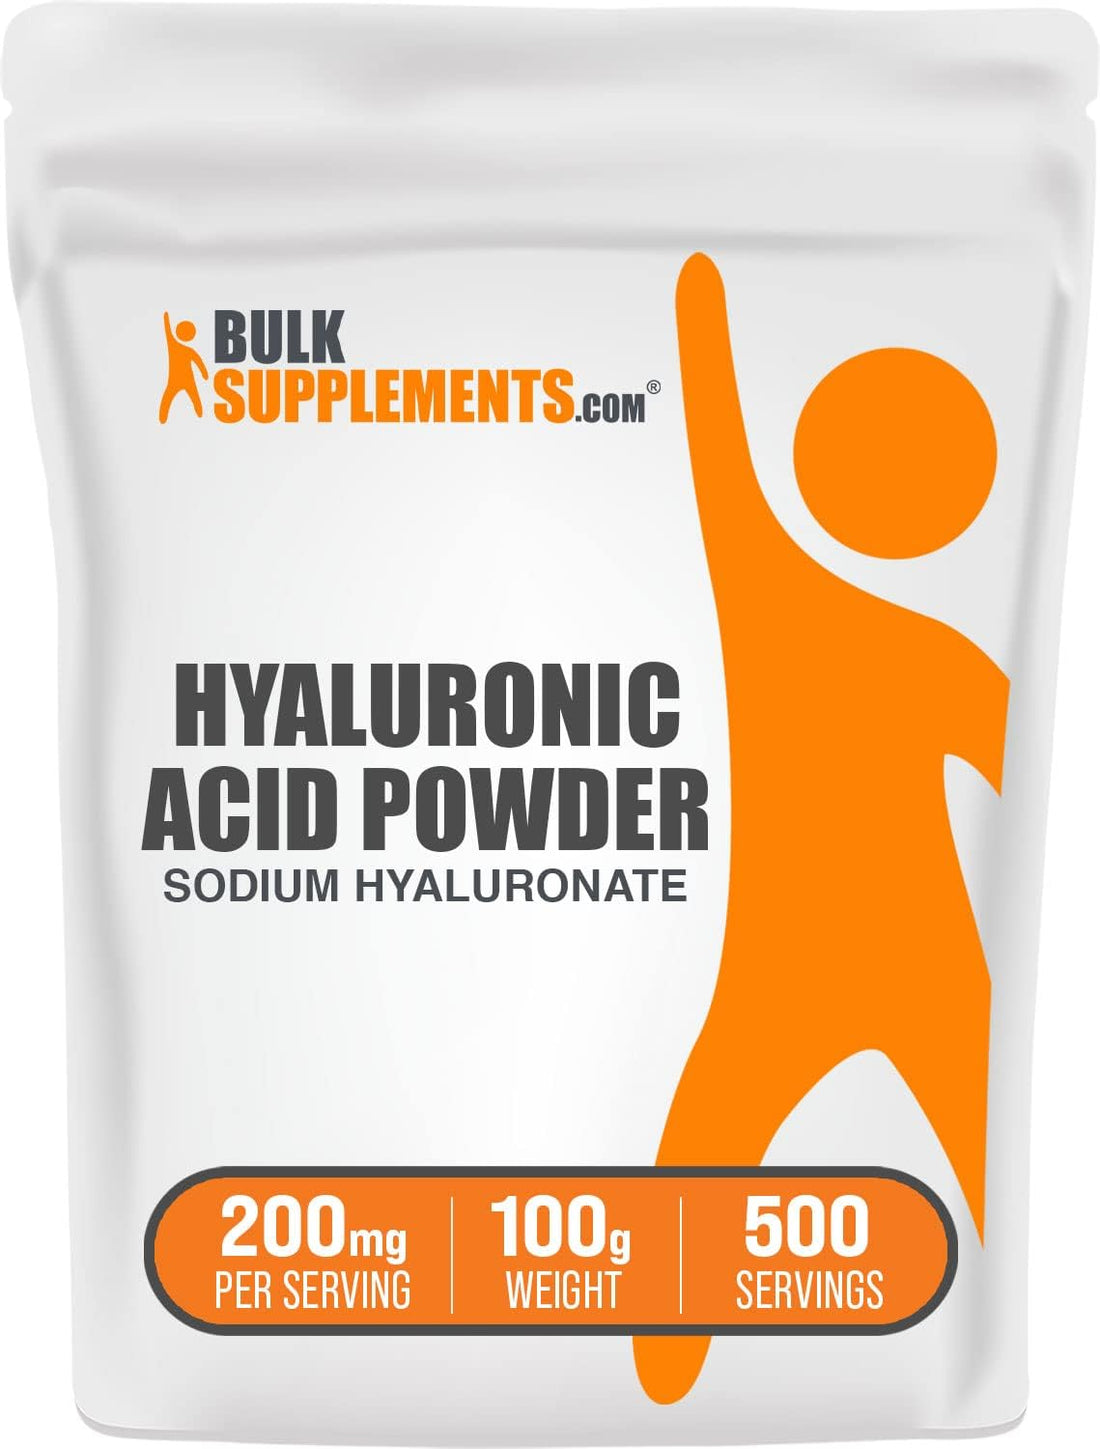 Amazon Recommendation for joint support: Hyaluronic Acid Food Grade